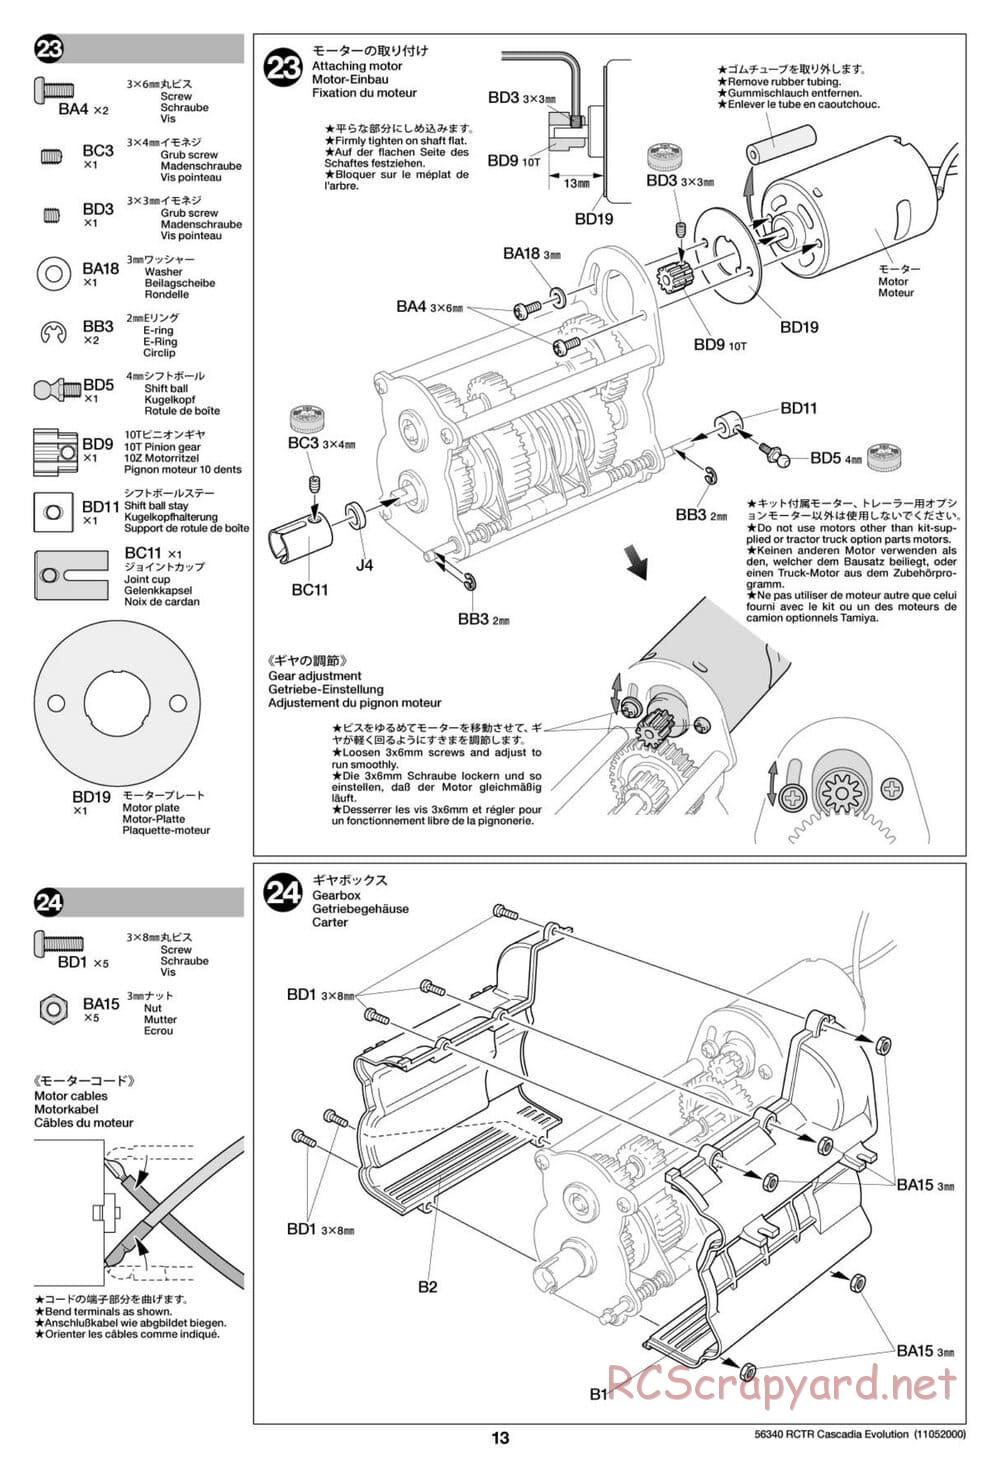 Tamiya - Freightliner Cascadia Evolution Tractor Truck Chassis - Manual - Page 13